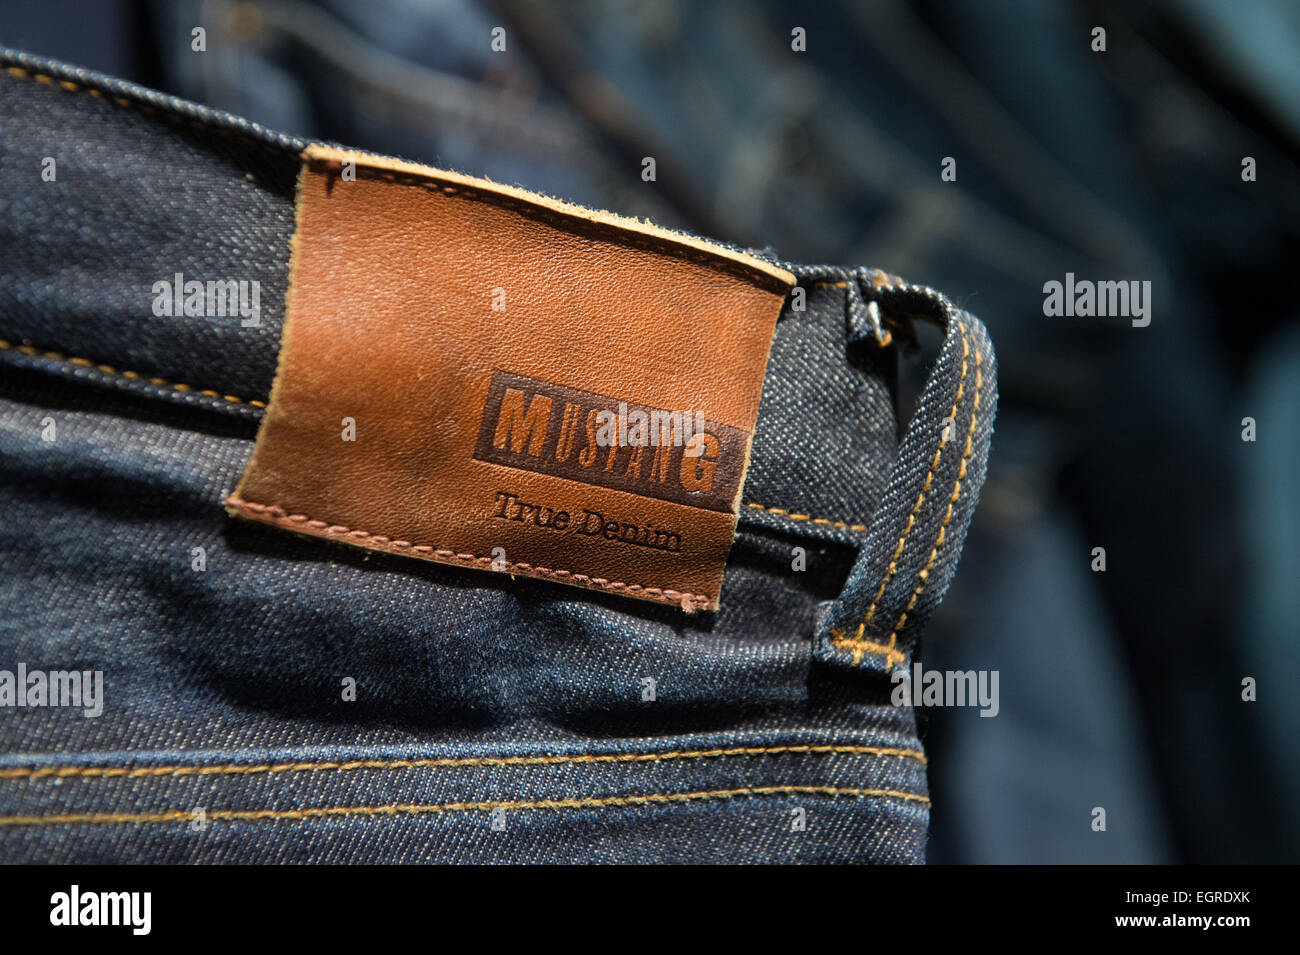 Kuenzelsau, Germany. 26th Feb, 2015. The company logo of jeans manufacturer  Mustang is on display on a pair of jeans at the company's headquarter and  main production facility site in Kuenzelsau, Germany,